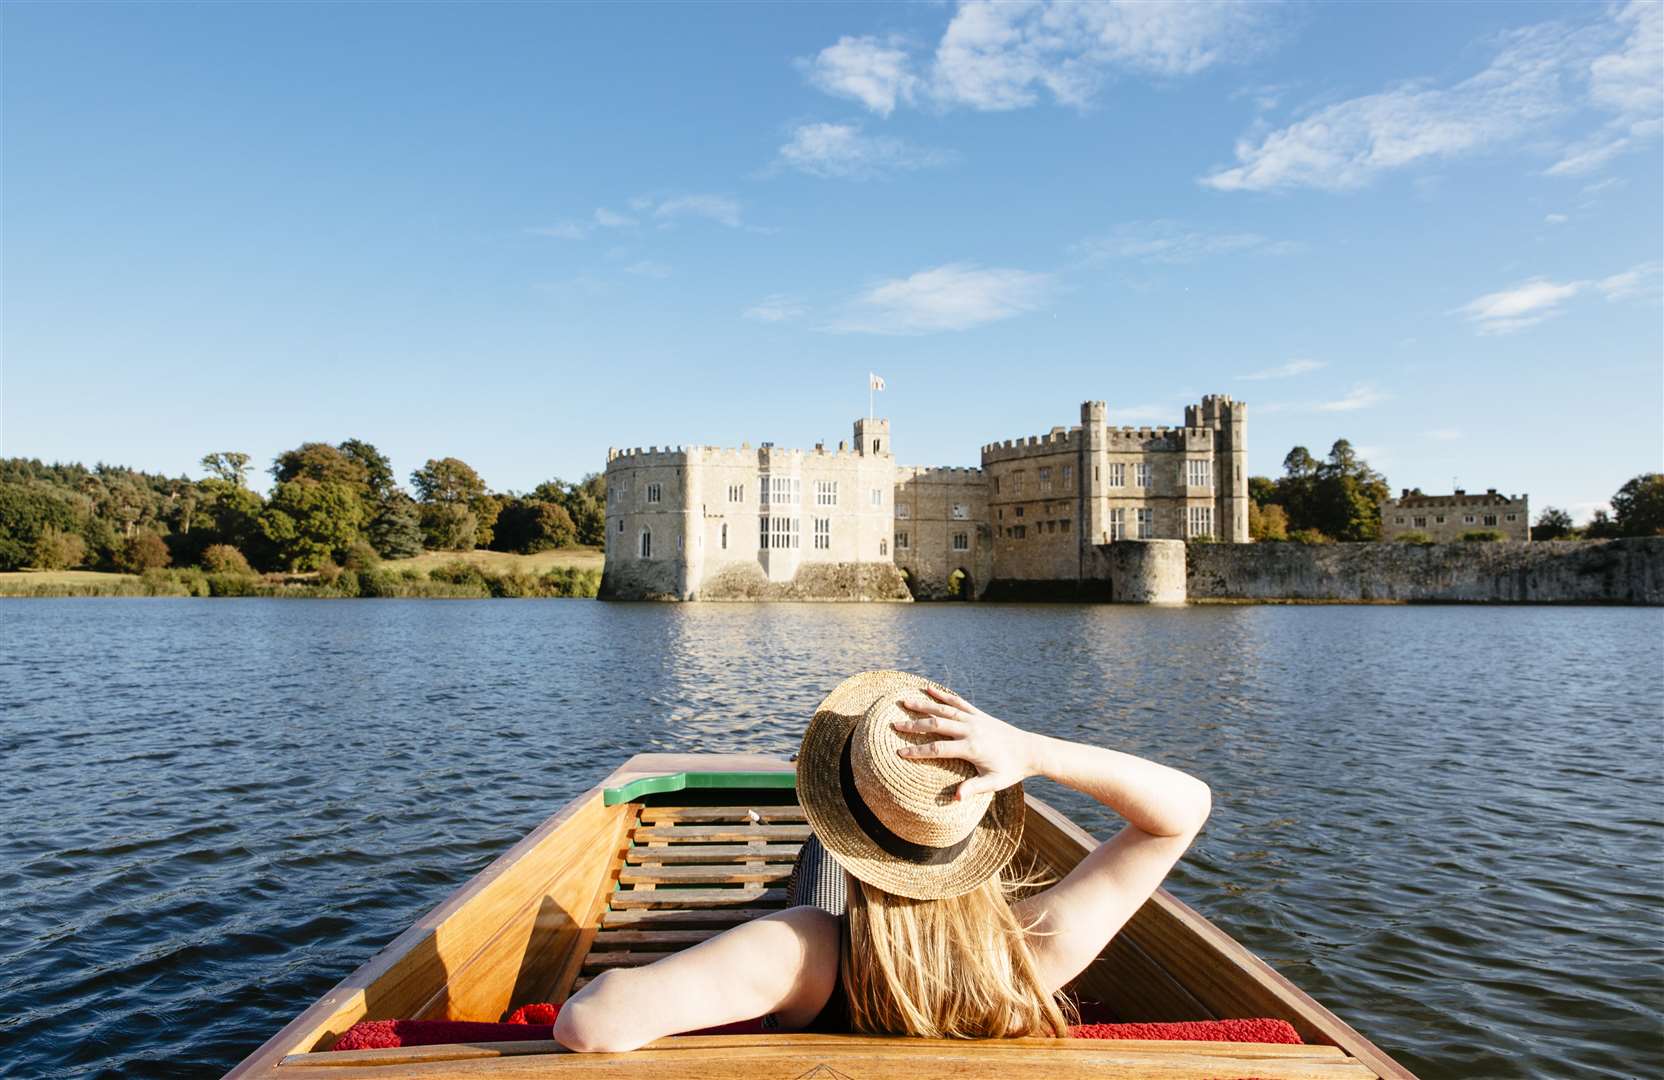 Get out on the water this summer with punting on Leeds Castle moat Picture: Ben Selway Photography